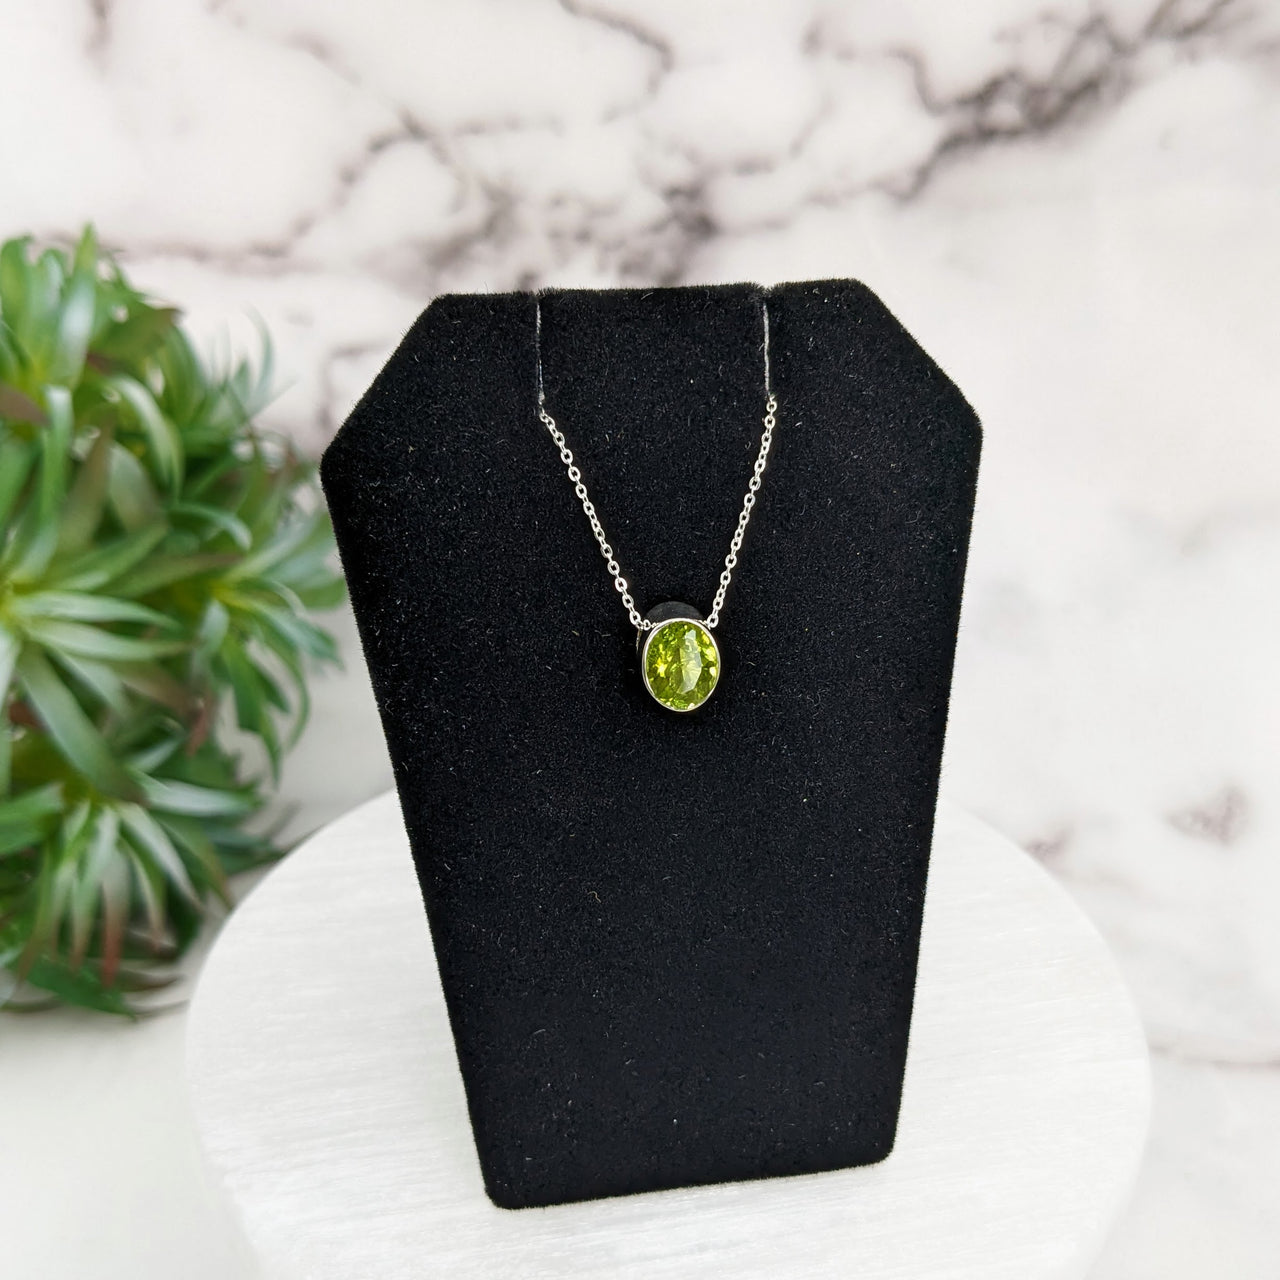 Peridot Faceted Necklace Sterling Silver Slider Pendant on 18" Chain #LV3256